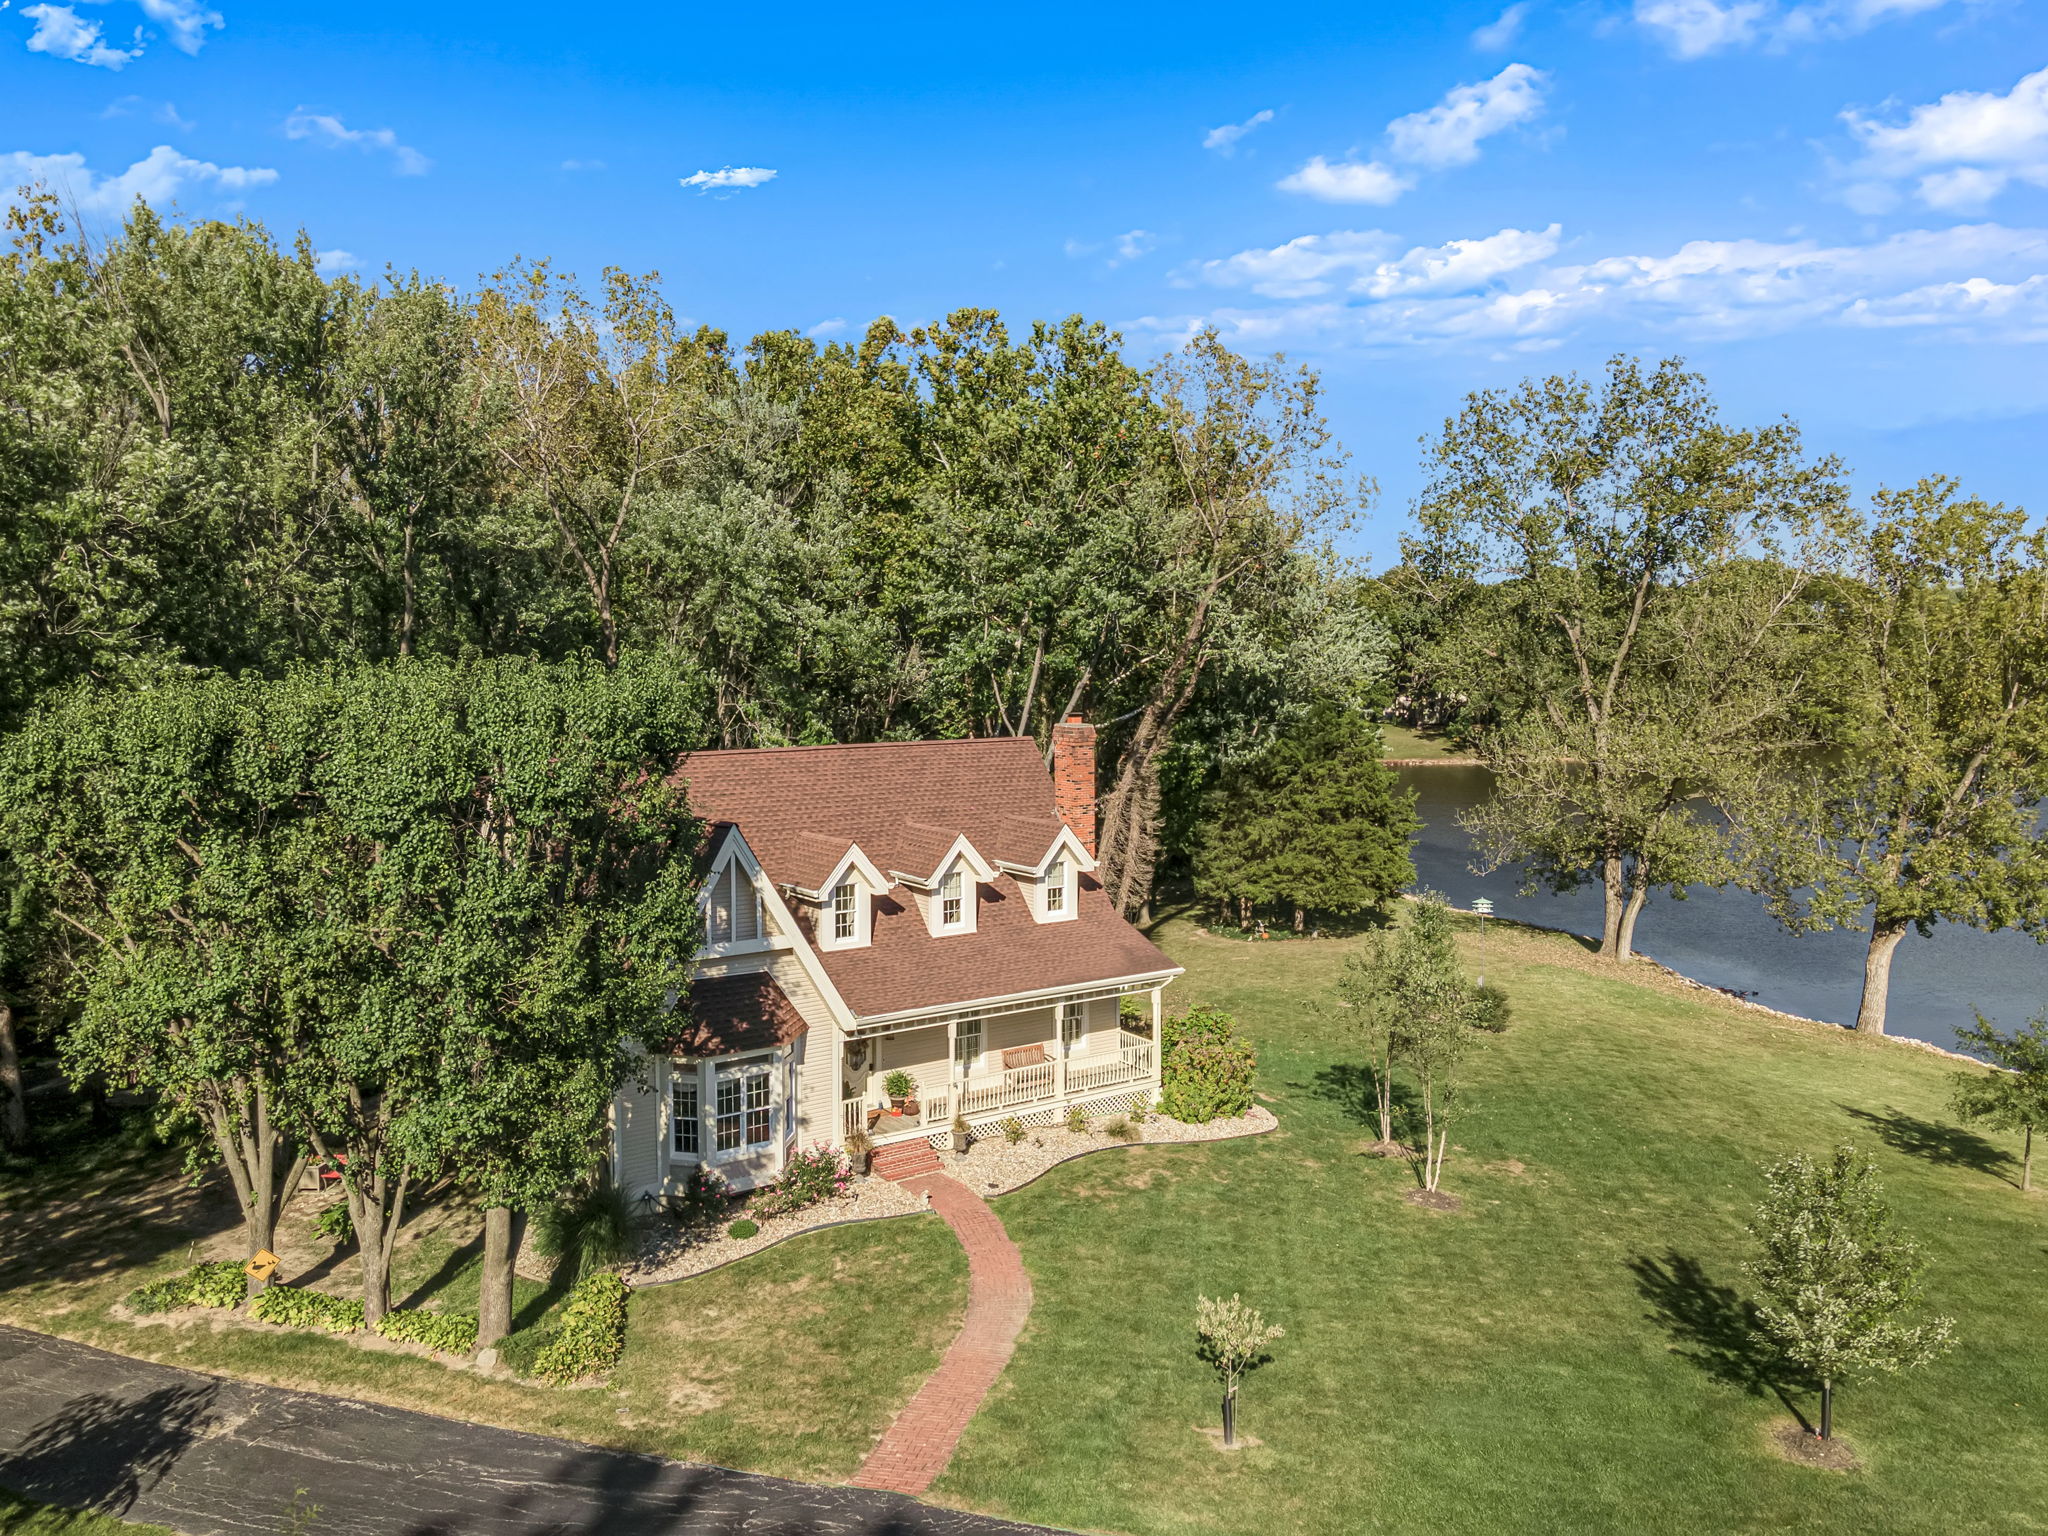 Plenty of Privacy, Grassy Yard Space & Views of the Lake